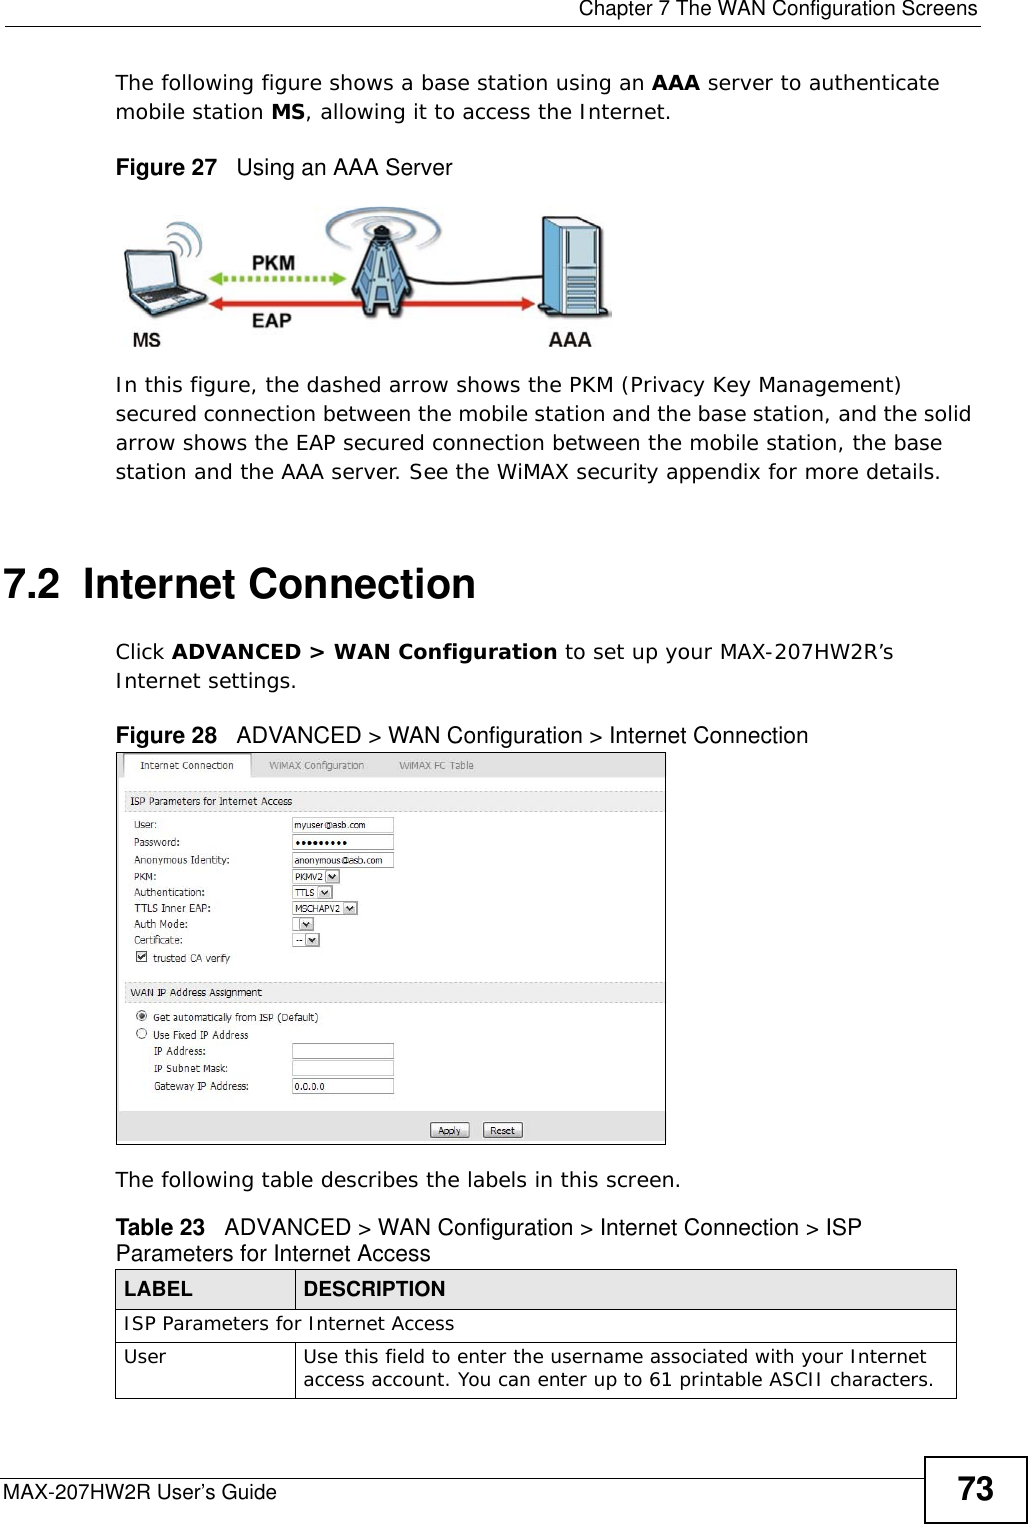  Chapter 7 The WAN Configuration ScreensMAX-207HW2R User’s Guide 73The following figure shows a base station using an AAA server to authenticate mobile station MS, allowing it to access the Internet.Figure 27   Using an AAA ServerIn this figure, the dashed arrow shows the PKM (Privacy Key Management) secured connection between the mobile station and the base station, and the solid arrow shows the EAP secured connection between the mobile station, the base station and the AAA server. See the WiMAX security appendix for more details.7.2  Internet ConnectionClick ADVANCED &gt; WAN Configuration to set up your MAX-207HW2R’s Internet settings.Figure 28   ADVANCED &gt; WAN Configuration &gt; Internet ConnectionThe following table describes the labels in this screen.  Table 23   ADVANCED &gt; WAN Configuration &gt; Internet Connection &gt; ISP Parameters for Internet AccessLABEL DESCRIPTIONISP Parameters for Internet AccessUser Use this field to enter the username associated with your Internet access account. You can enter up to 61 printable ASCII characters.